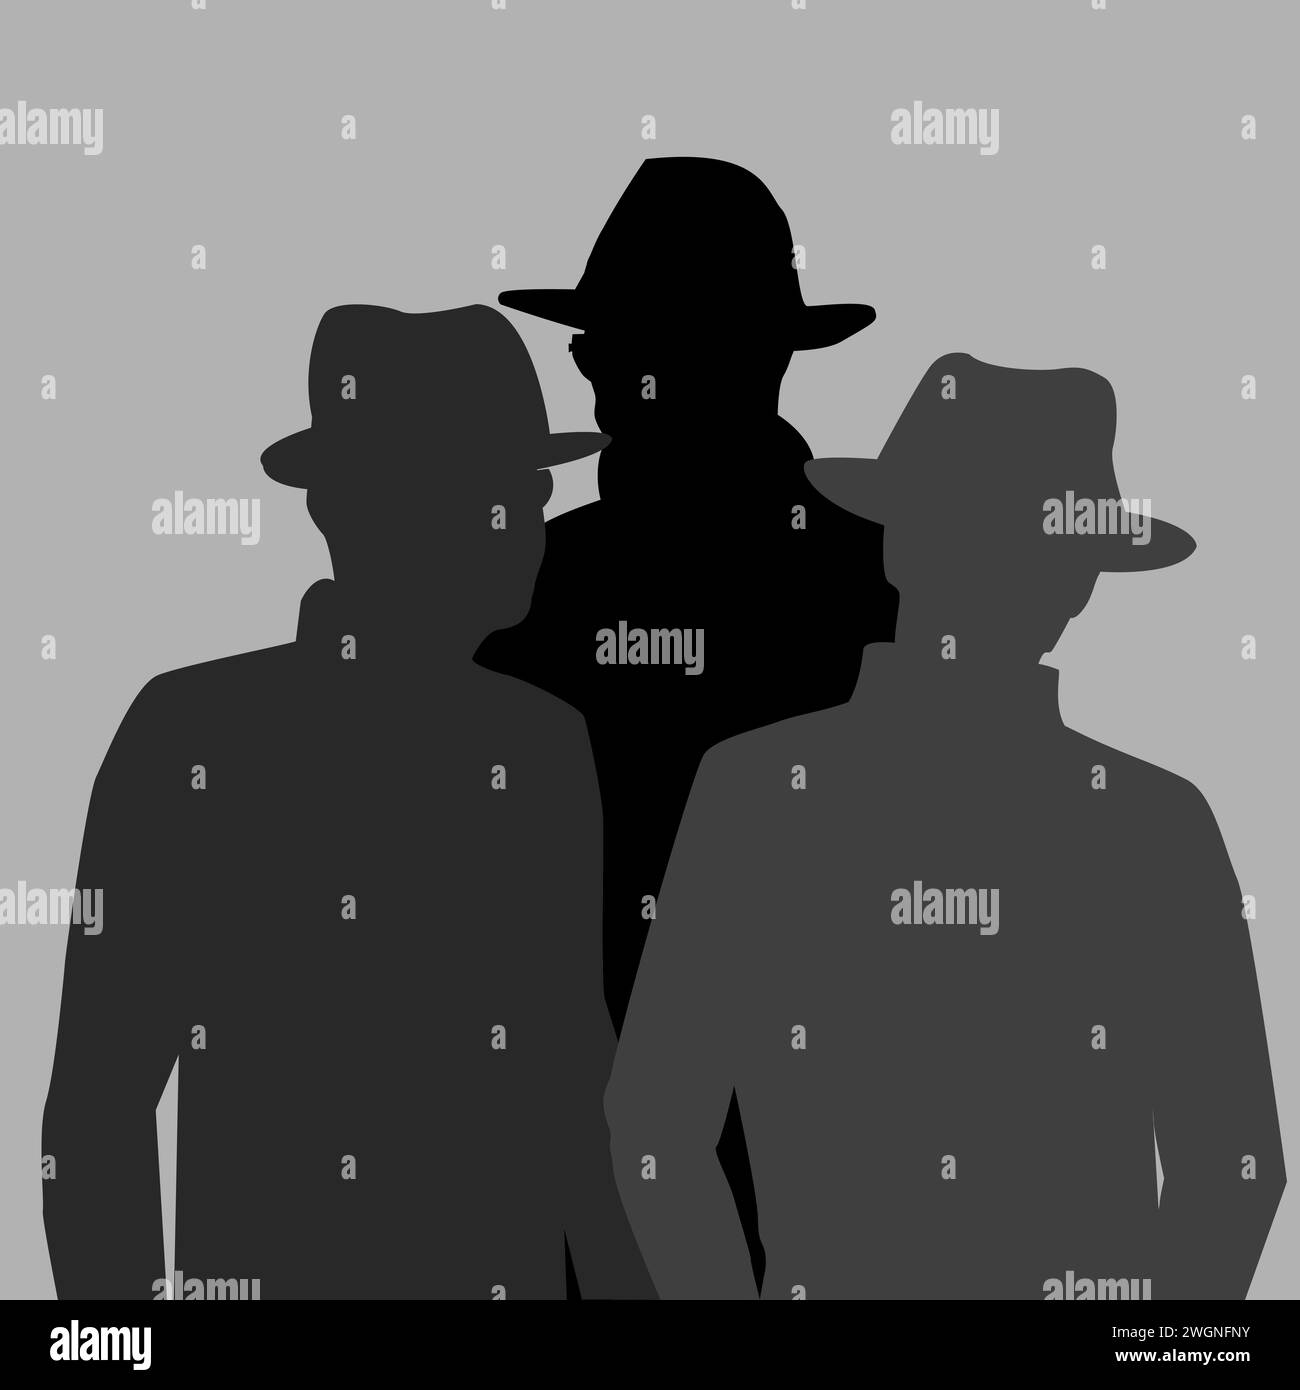 Security, Detective, Privacy concept with silhouettes of three men wearing hats Stock Vector